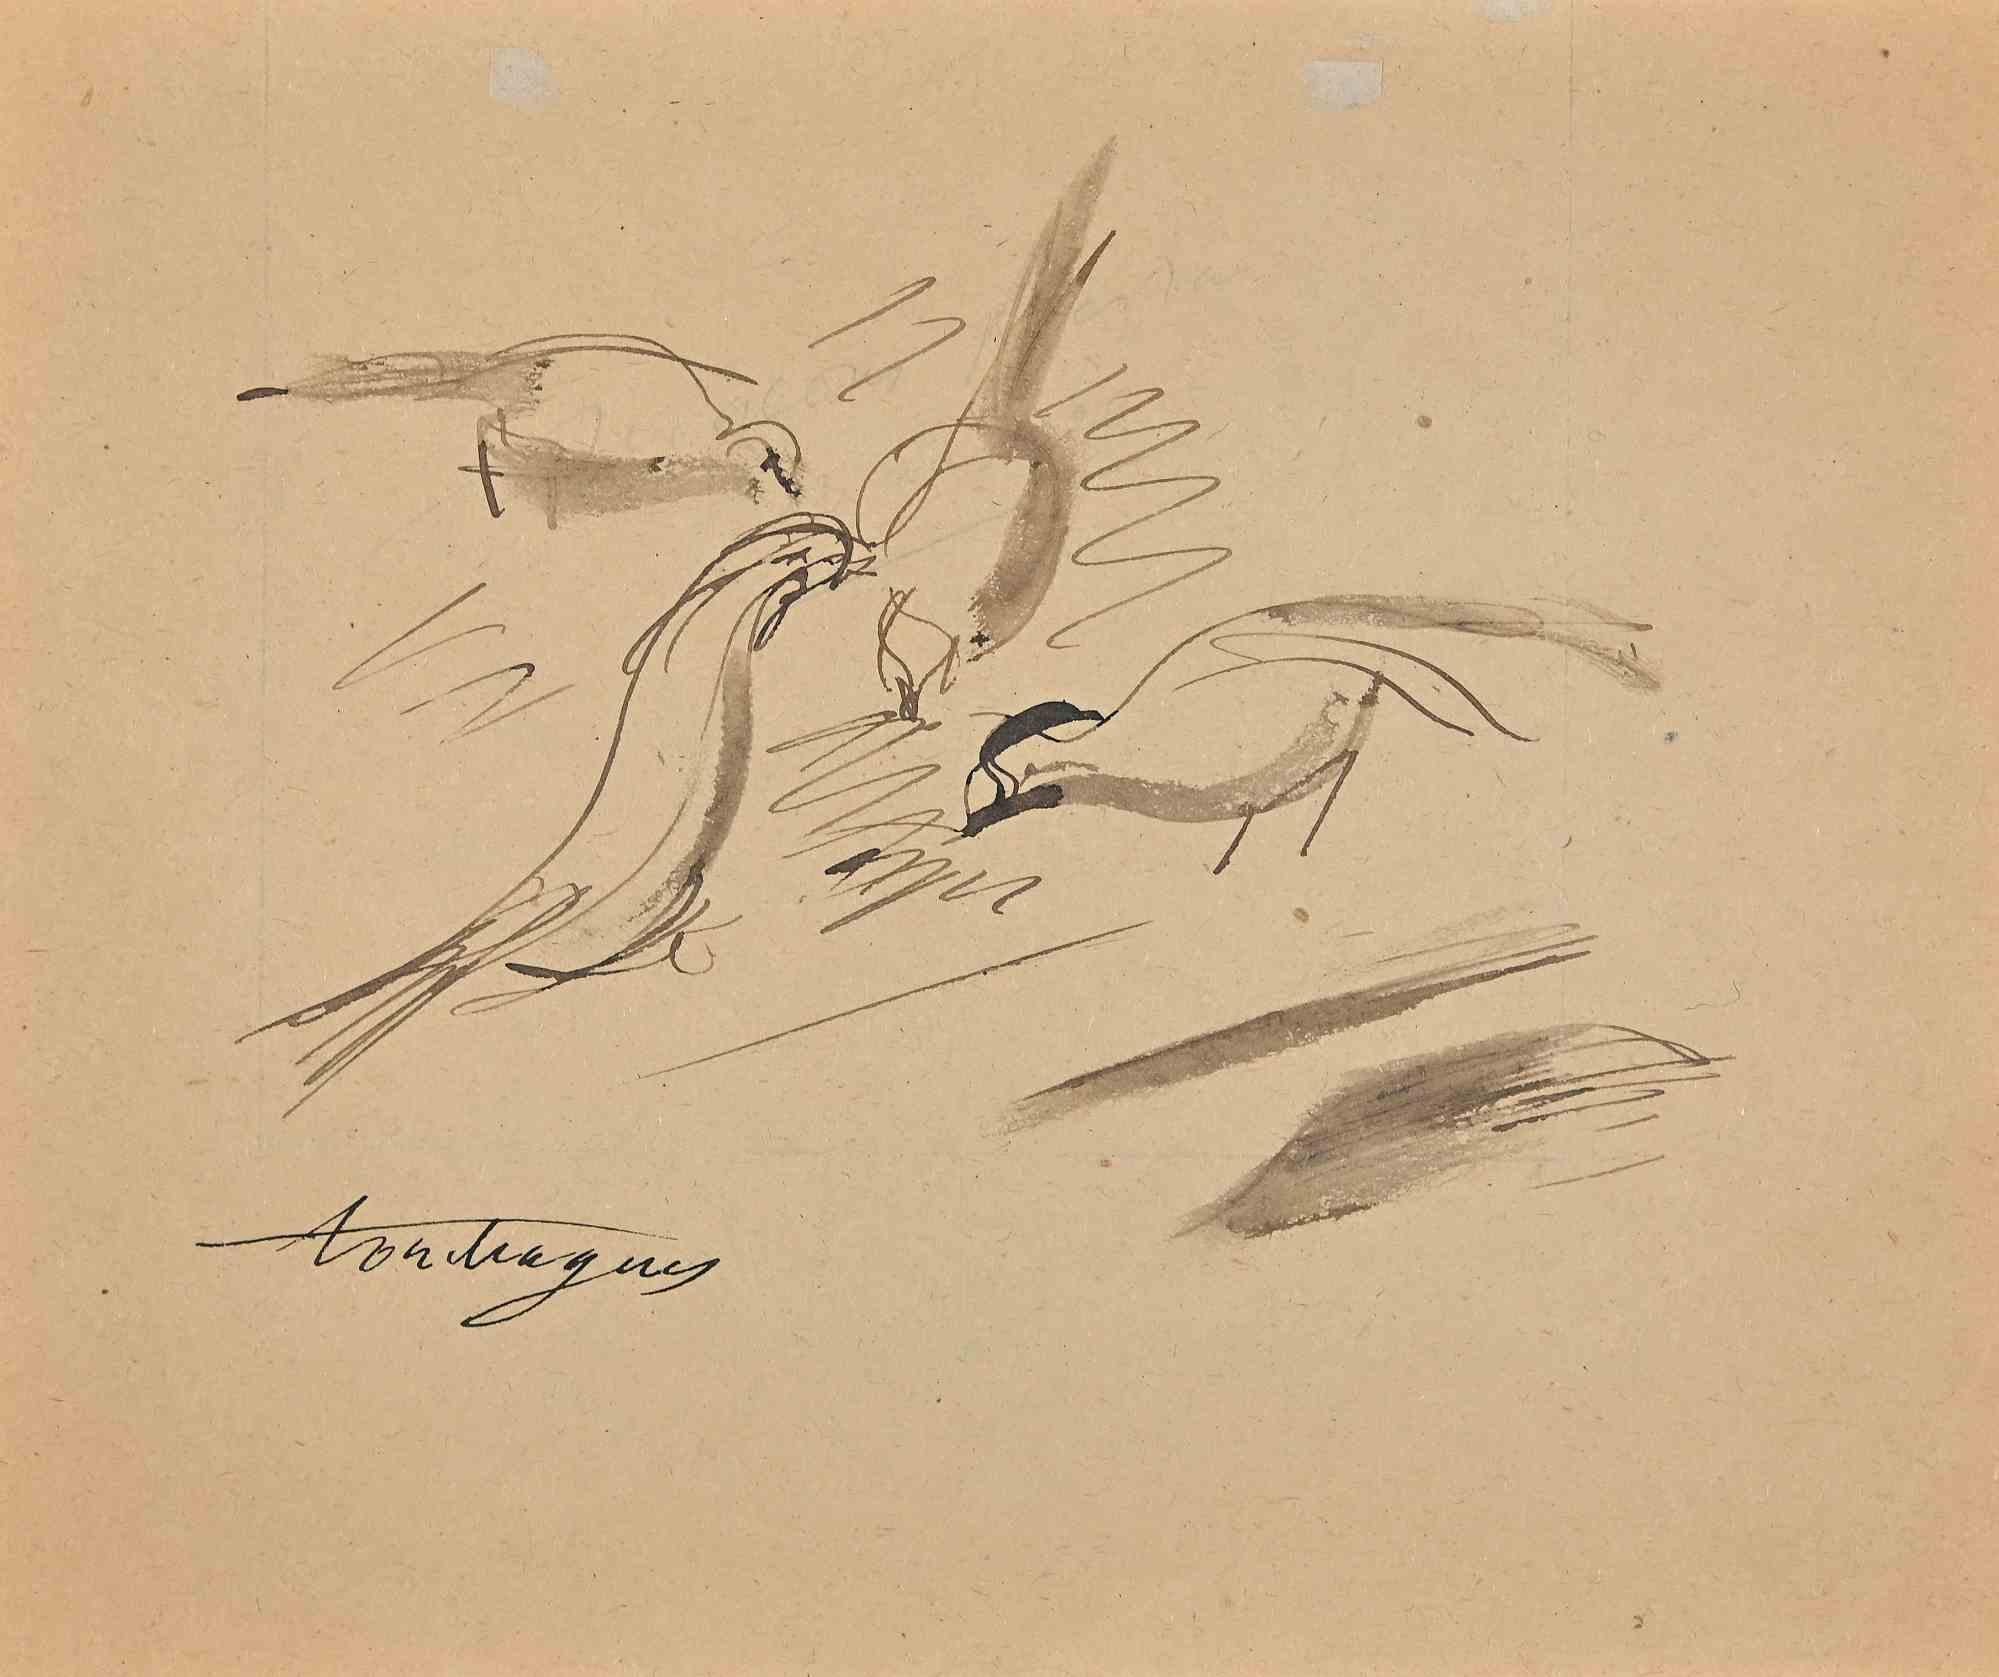 The Birds is an Original Drawing realized by Louis Touchagues in the mid 20th Century.

Drawing in ink and pen.

Hand-signed on the lower by the artist.

Good conditions.

The delicate and beautiful fine strokes form the artwork in a harmonious